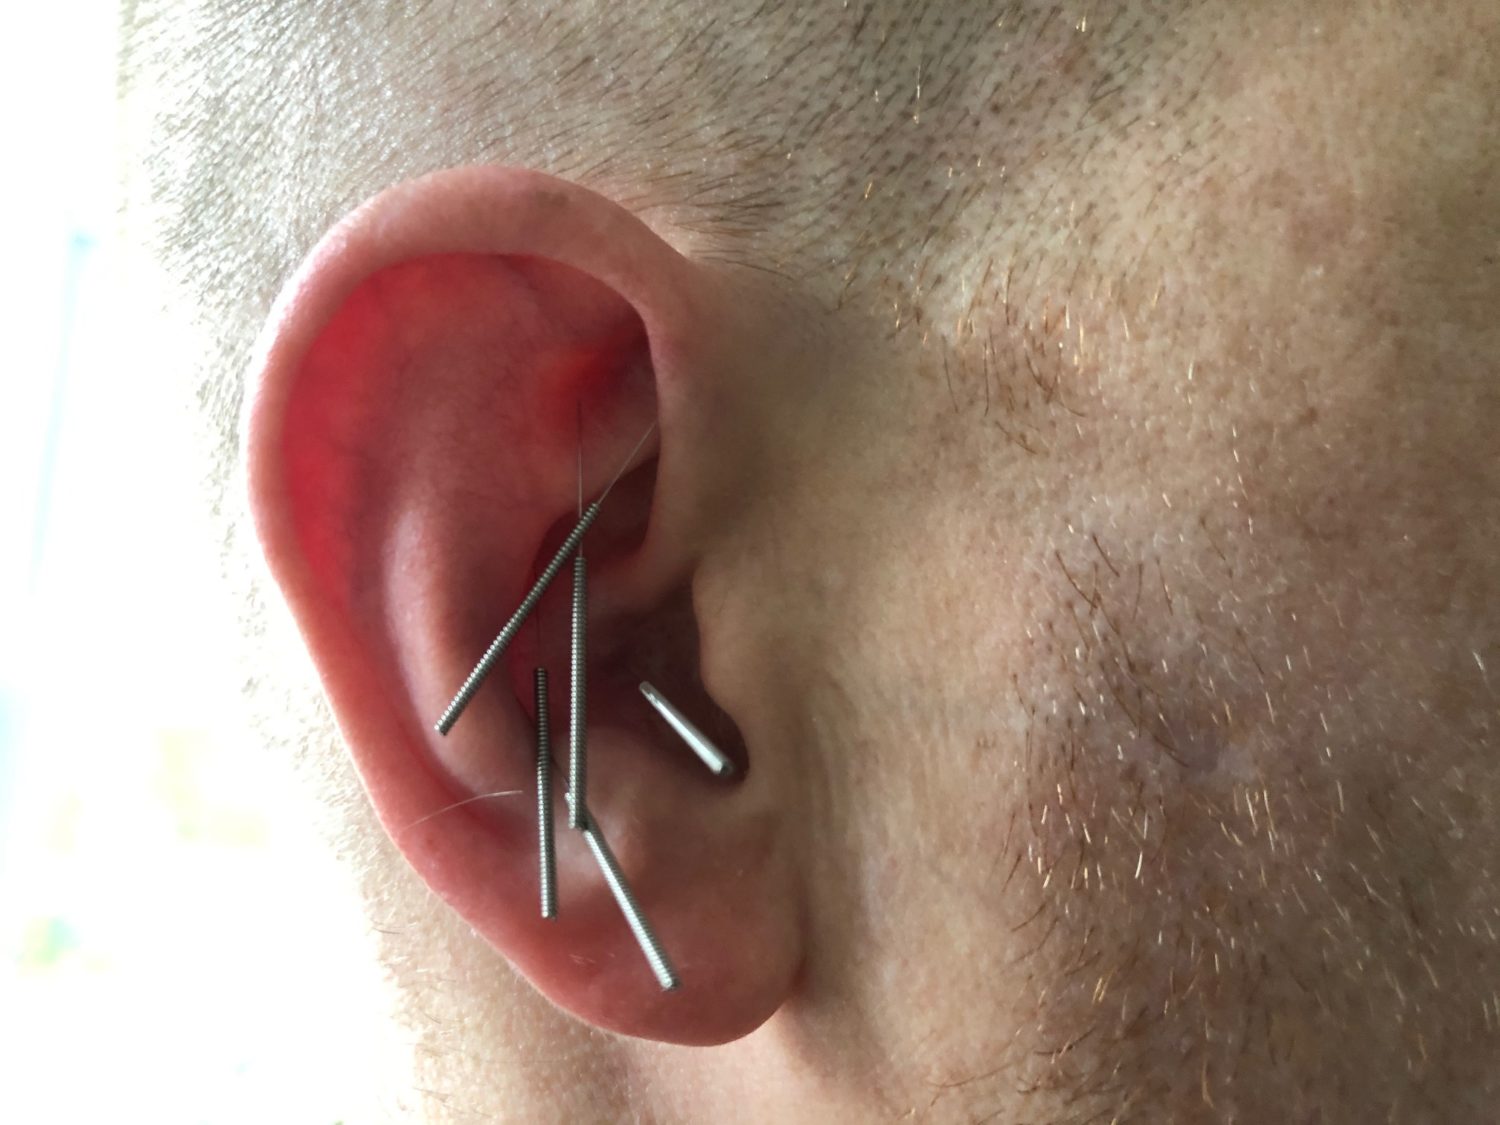 A Vivacity Acupuncture photograph showing five auricular acupuncture needles inserted at points on the patient's right ear. These points are known as the 5-point protocol developed by Dr. Mutulu Shakur.